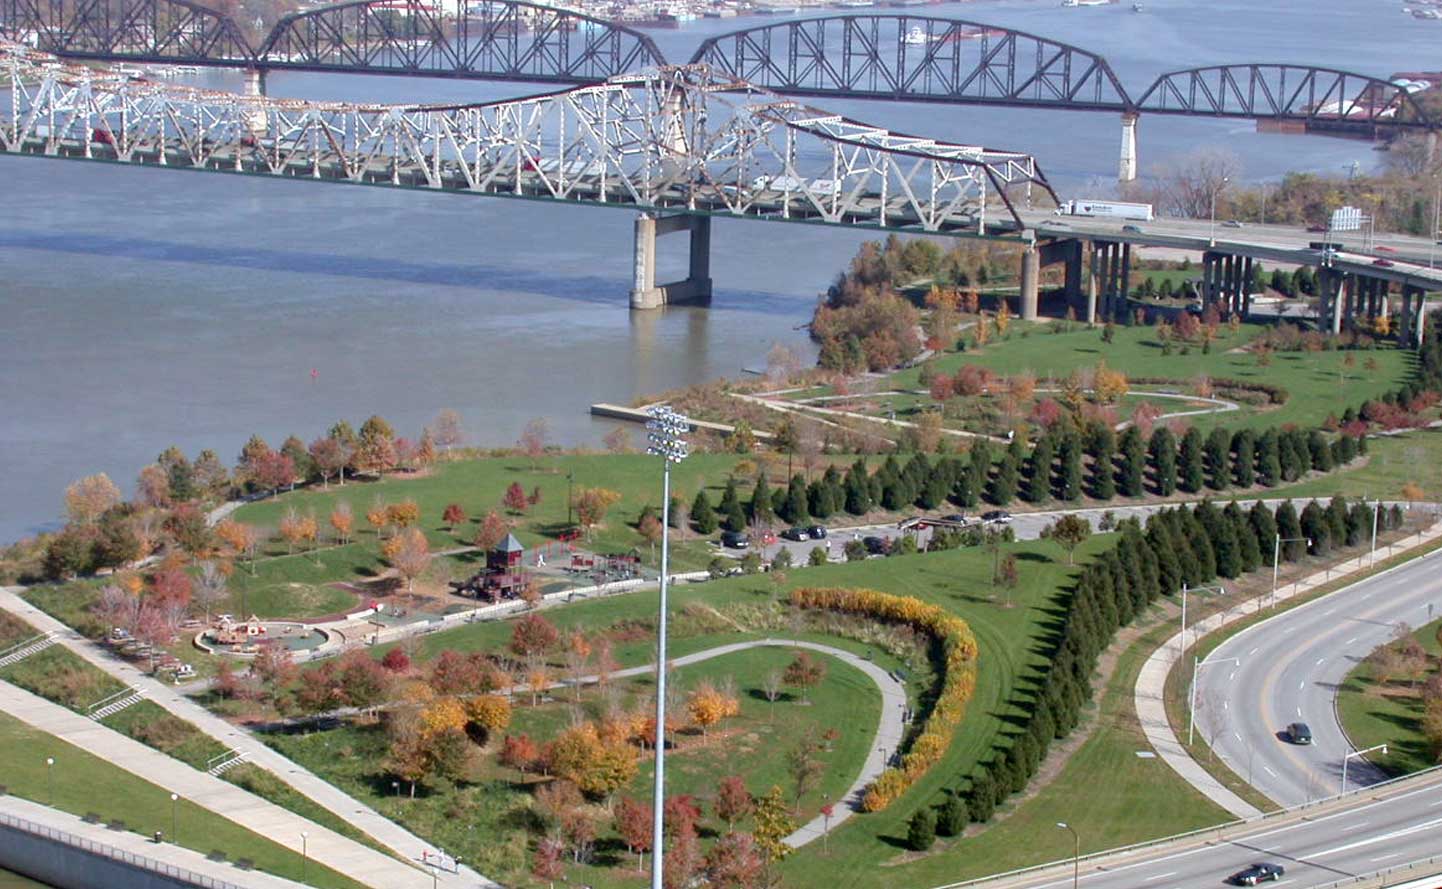 91 Louisville Waterfront Park Images, Stock Photos, 3D objects